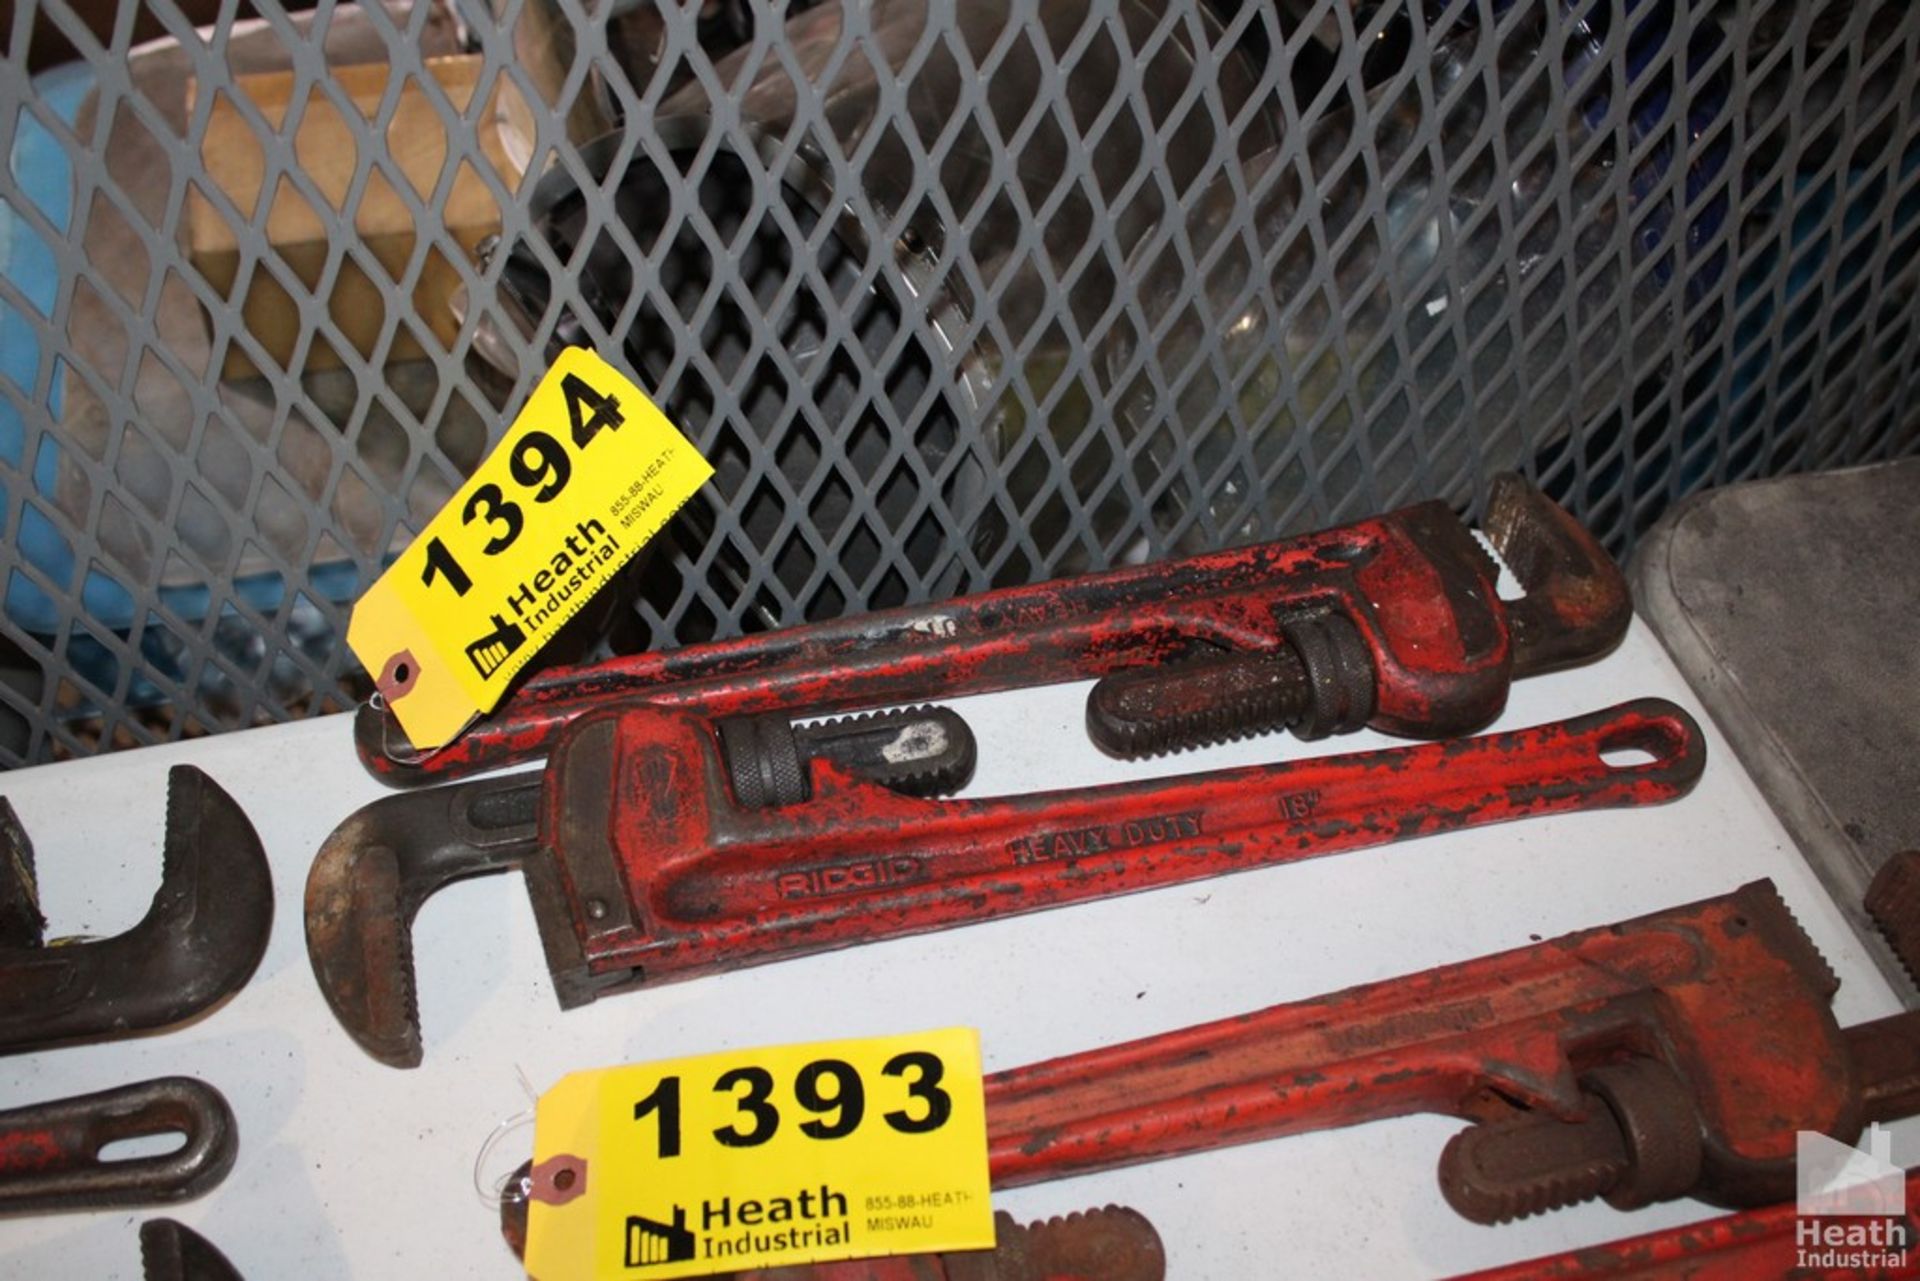 (2) RIDGID 18" PIPE WRENCHES